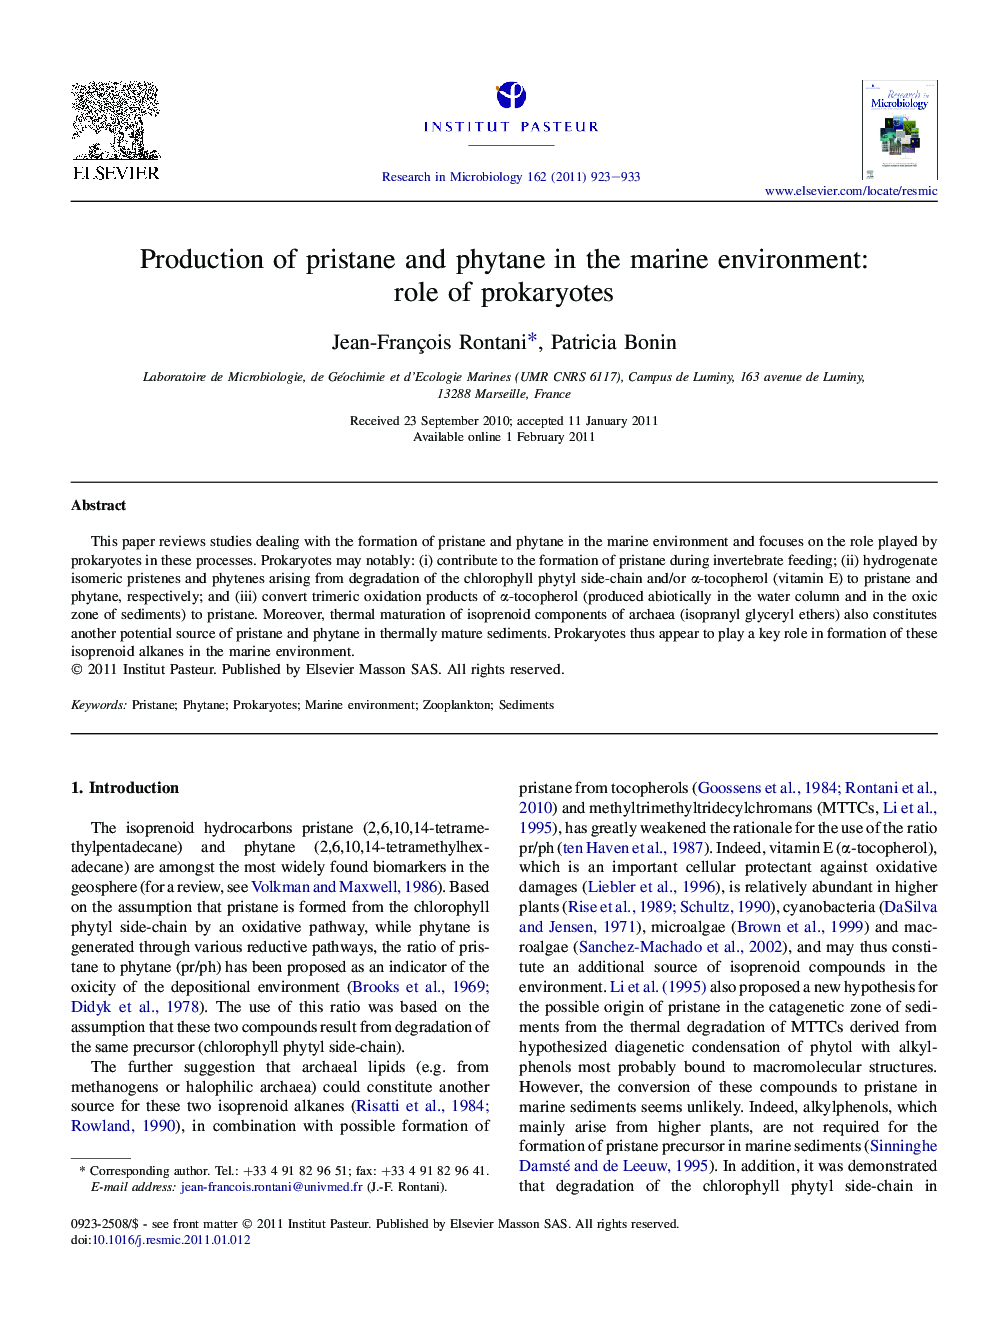 Production of pristane and phytane in the marine environment: role of prokaryotes